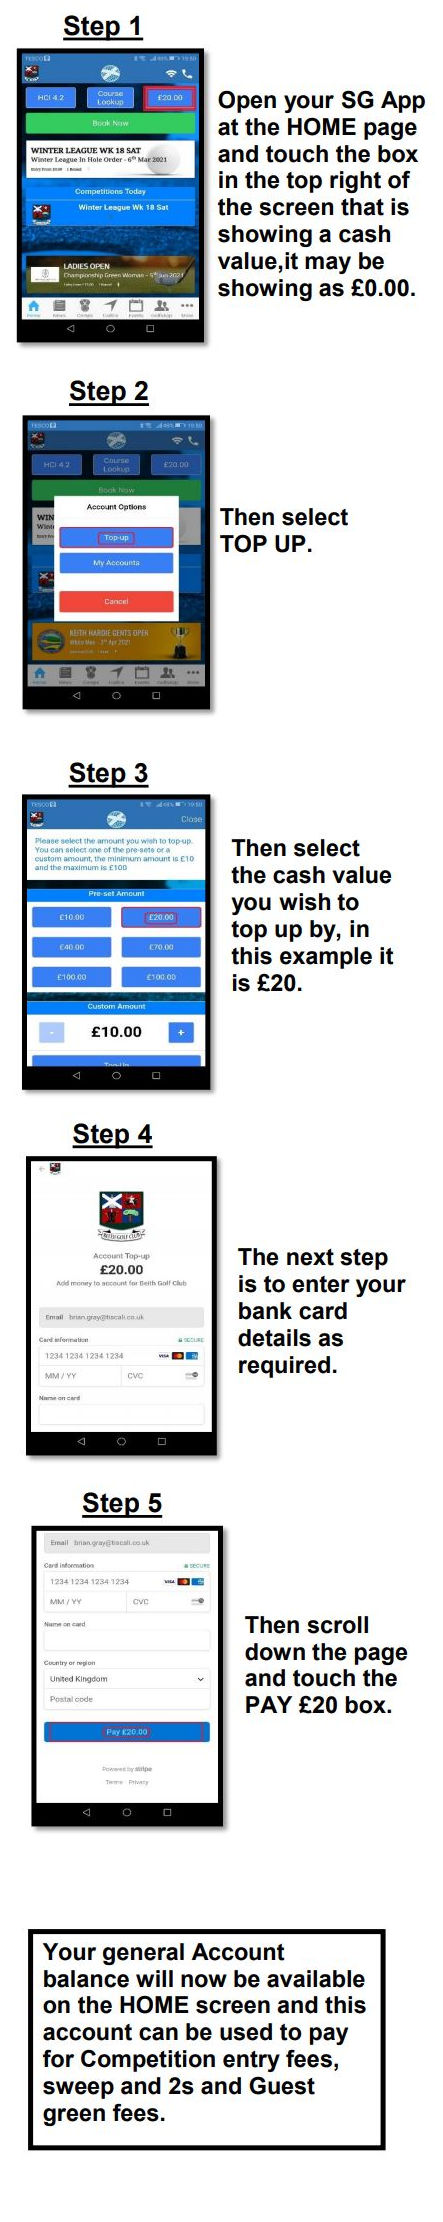 How to Top Up General Account 